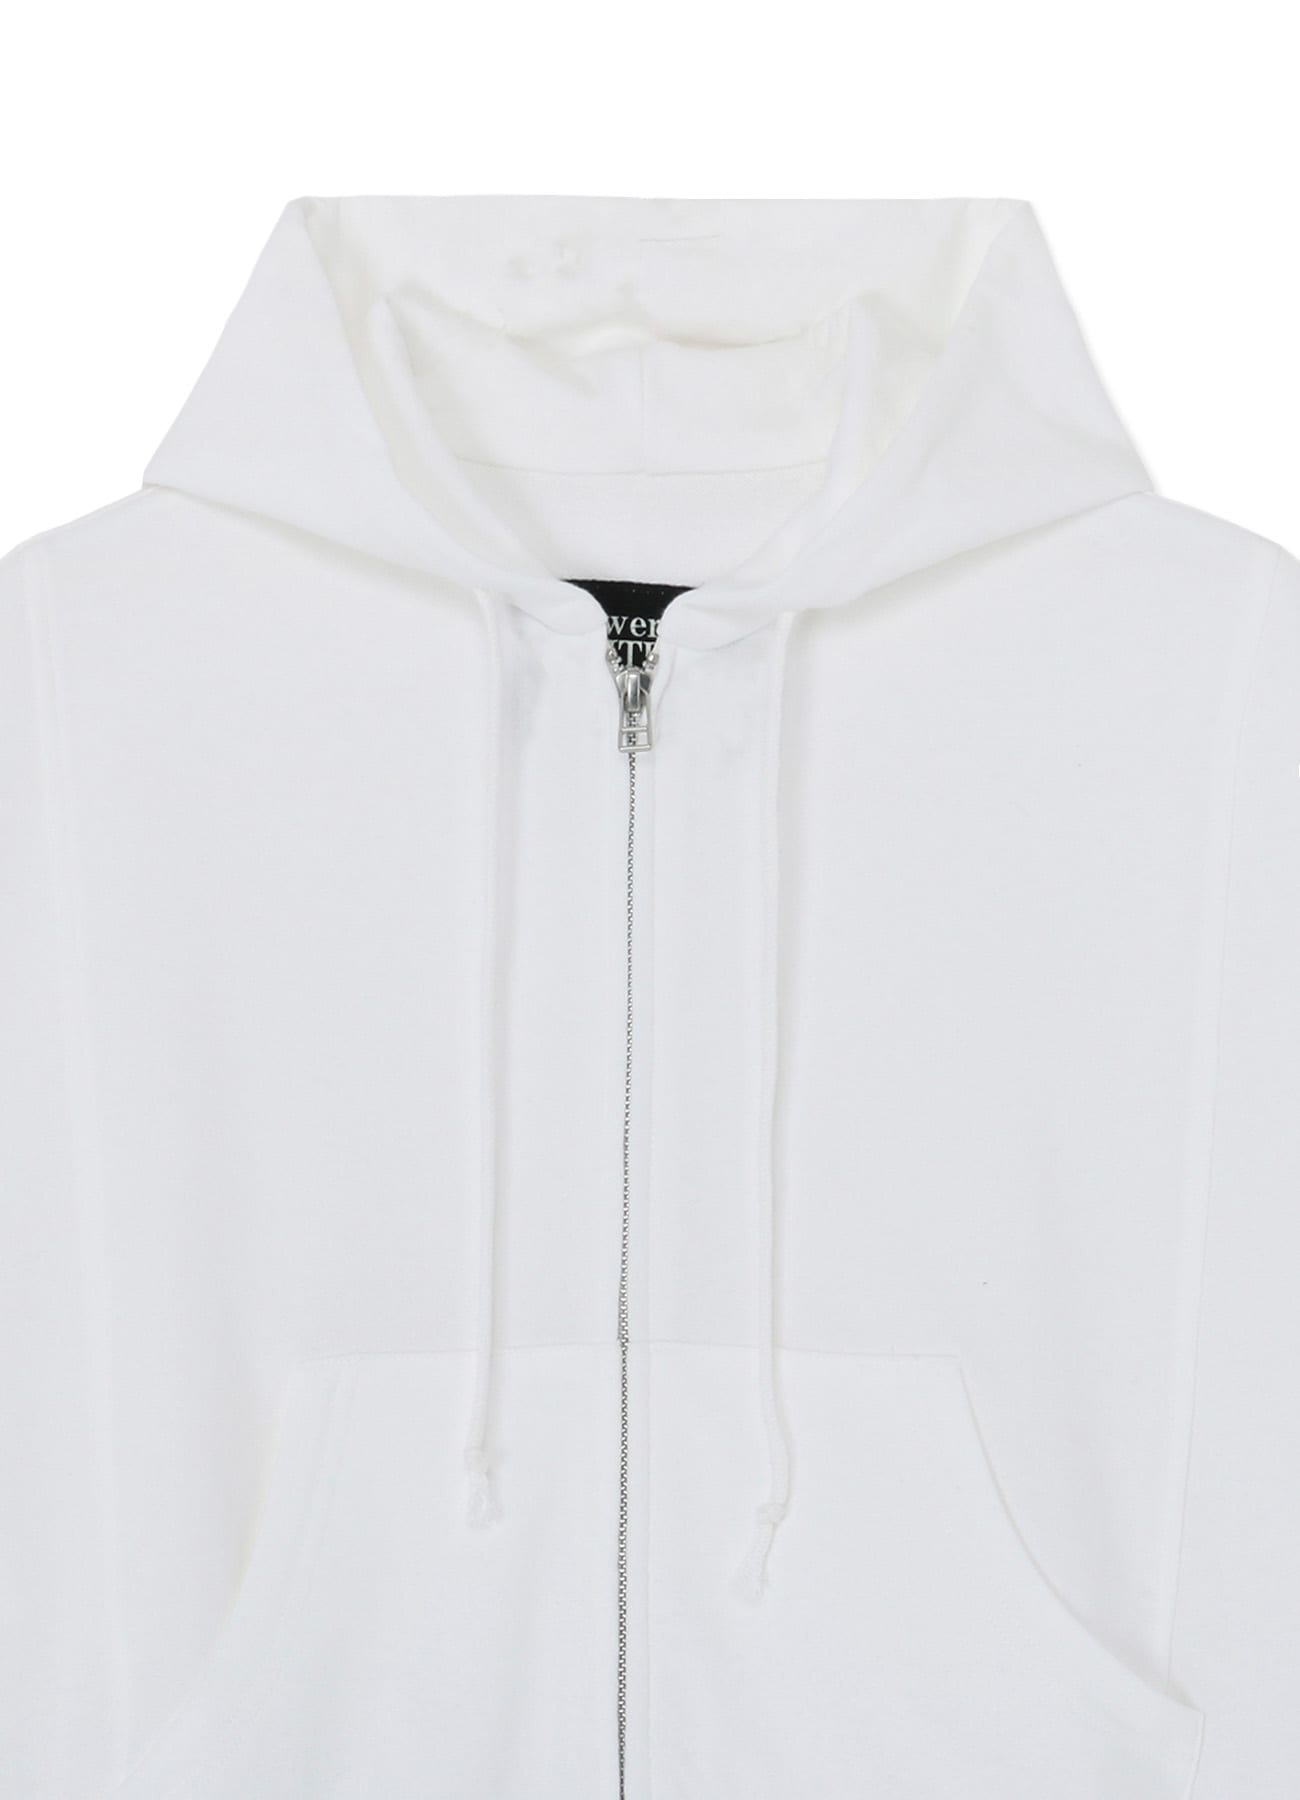 ASYMMETRIC ZIP-UP HOODIE(S White): power of the WHITE shirt｜THE 